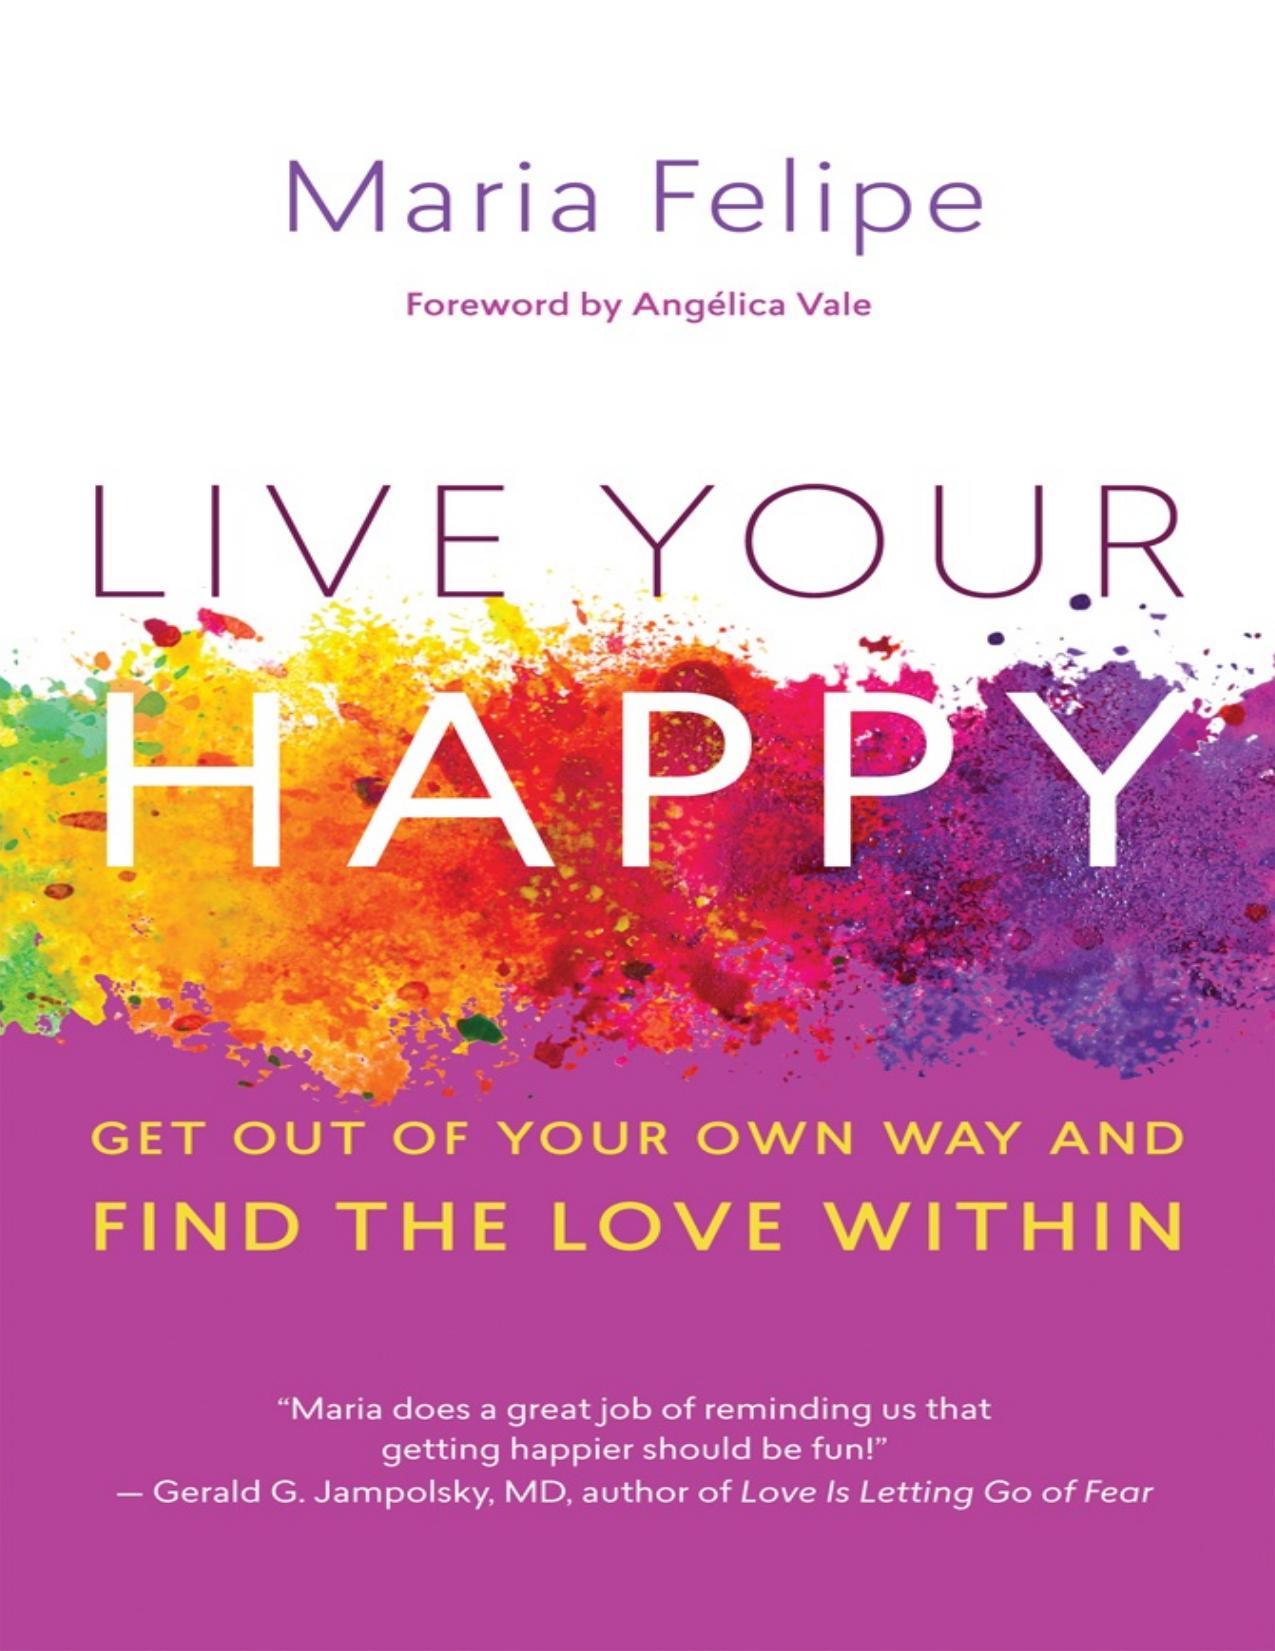 Live Your Happy: Get Out of Your Own Way and Find the Love Within by Maria Felipe